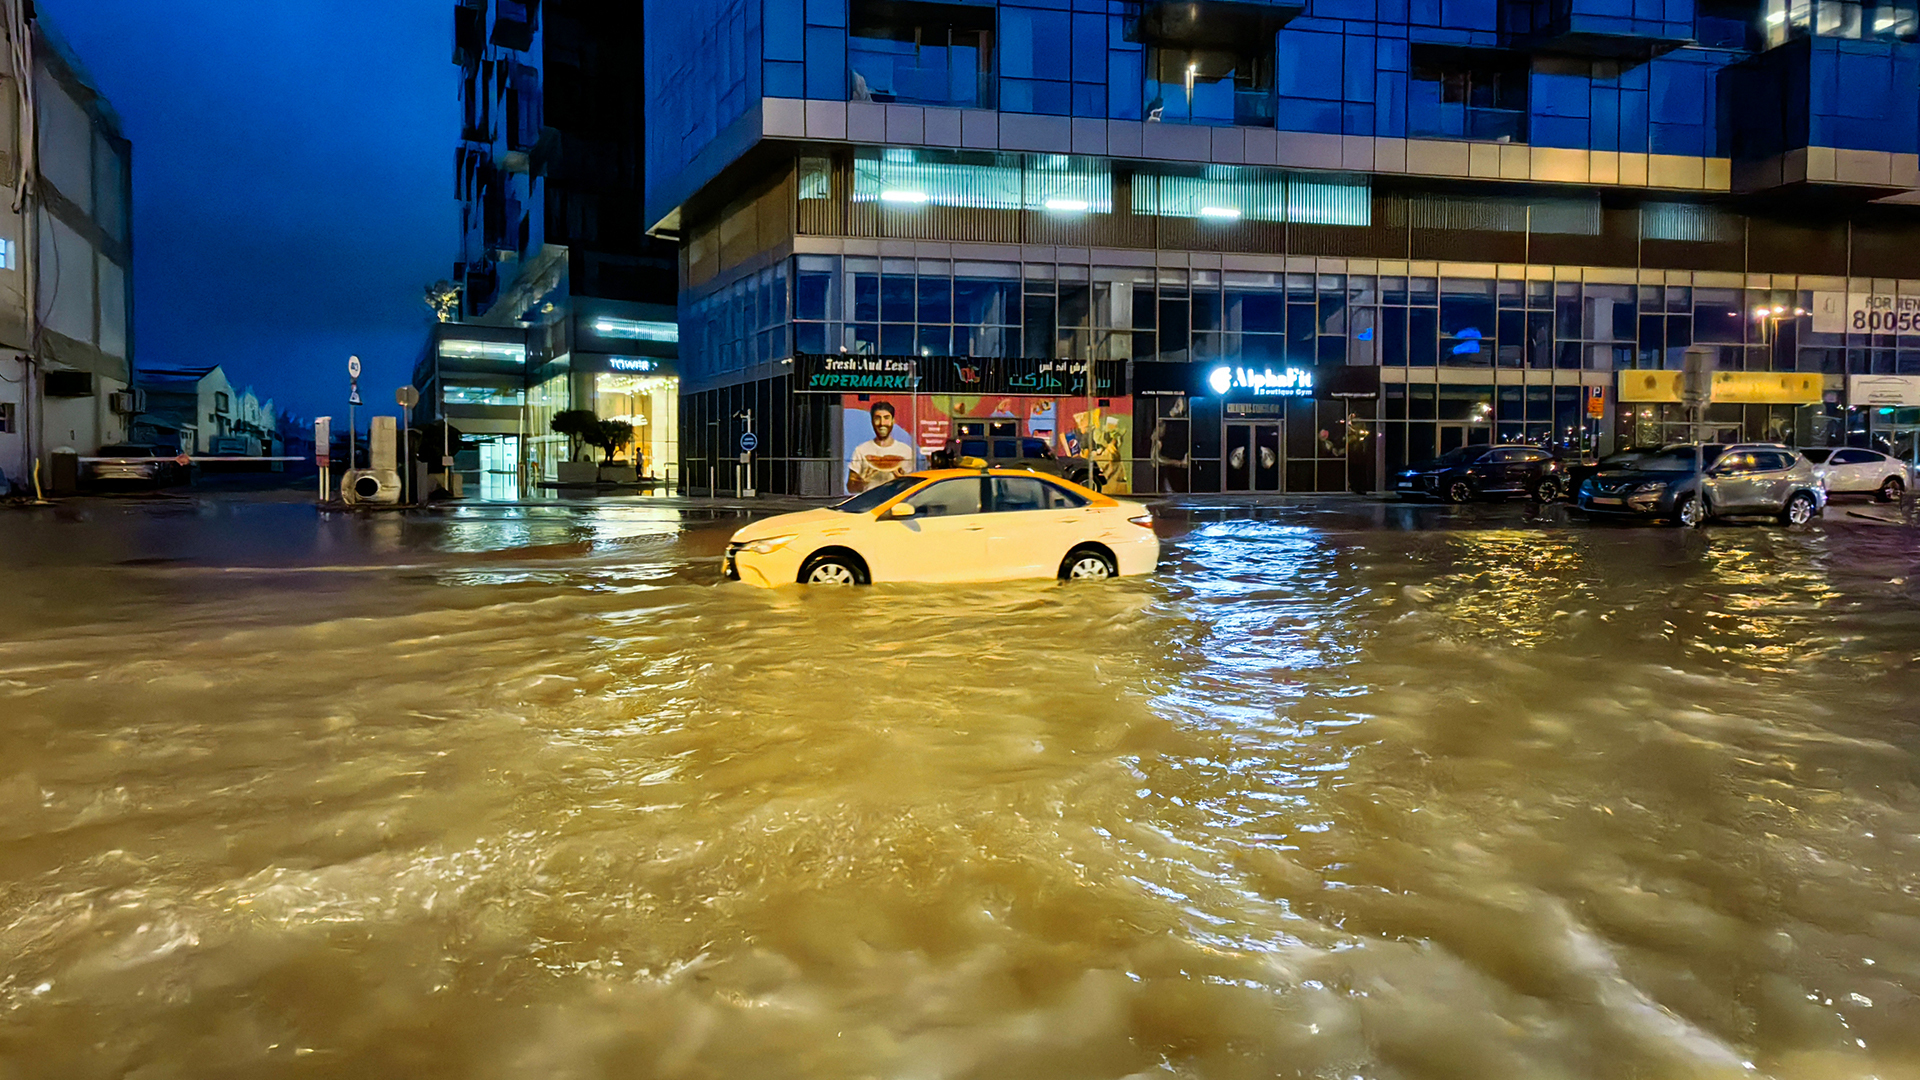 Record rain in 75 years drowns Dubai, flights cancelled, malls flooded [Video]